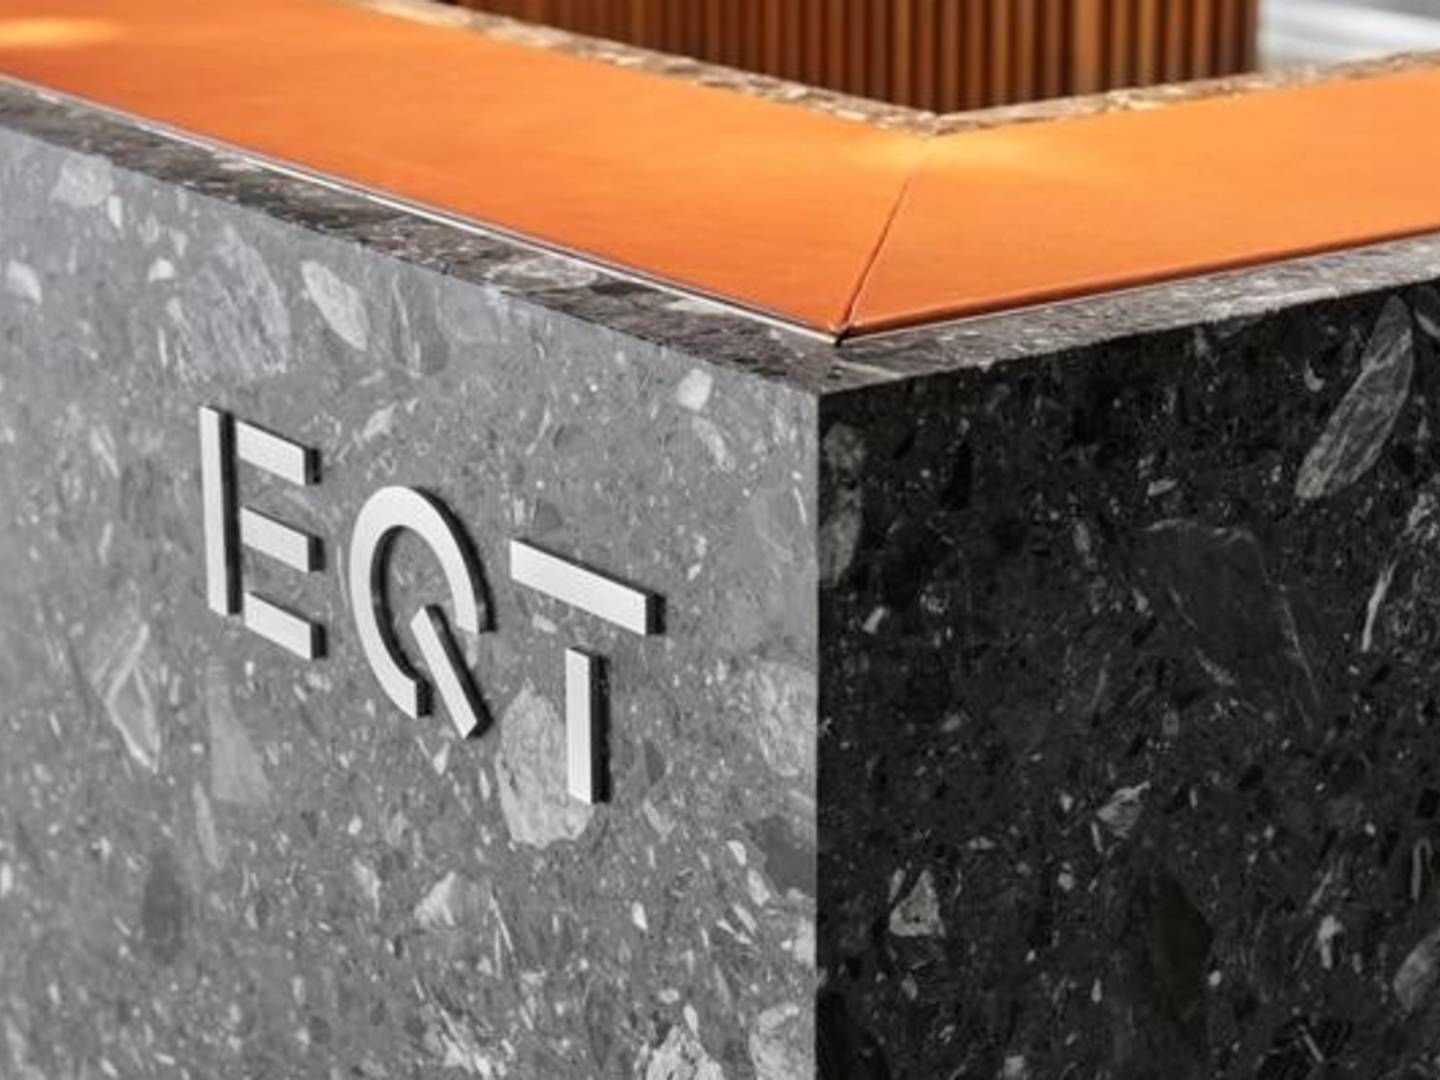 Swedish private equity firm EQT has raised about EUR 15bn so far for its new flagship fund despite wider economic and fundraising headwinds.. | Photo: EQT / PR